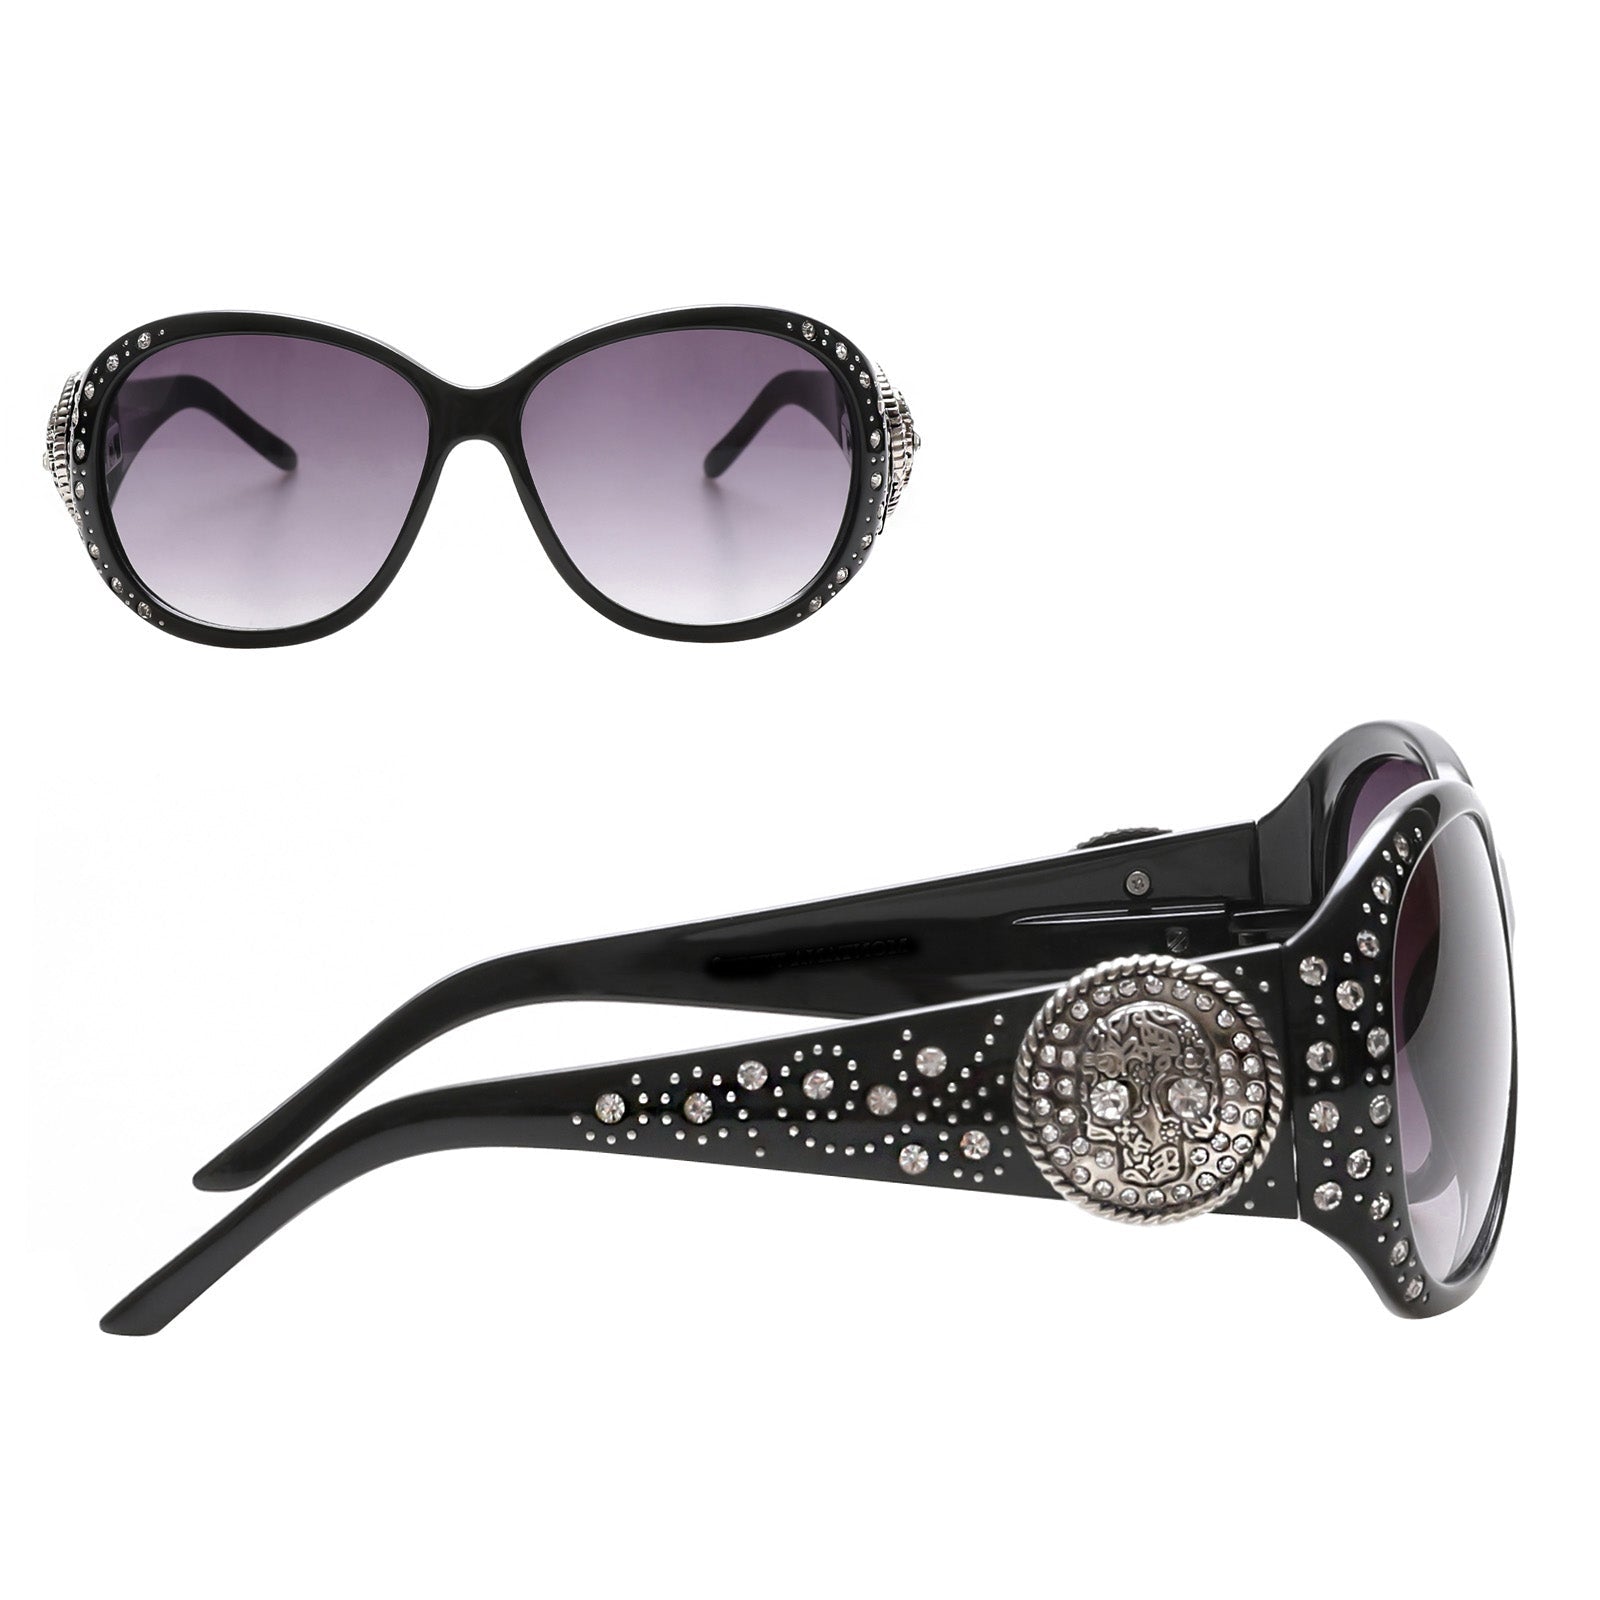 Montana West Sugar Skull Collection Sunglasses - Cowgirl Wear